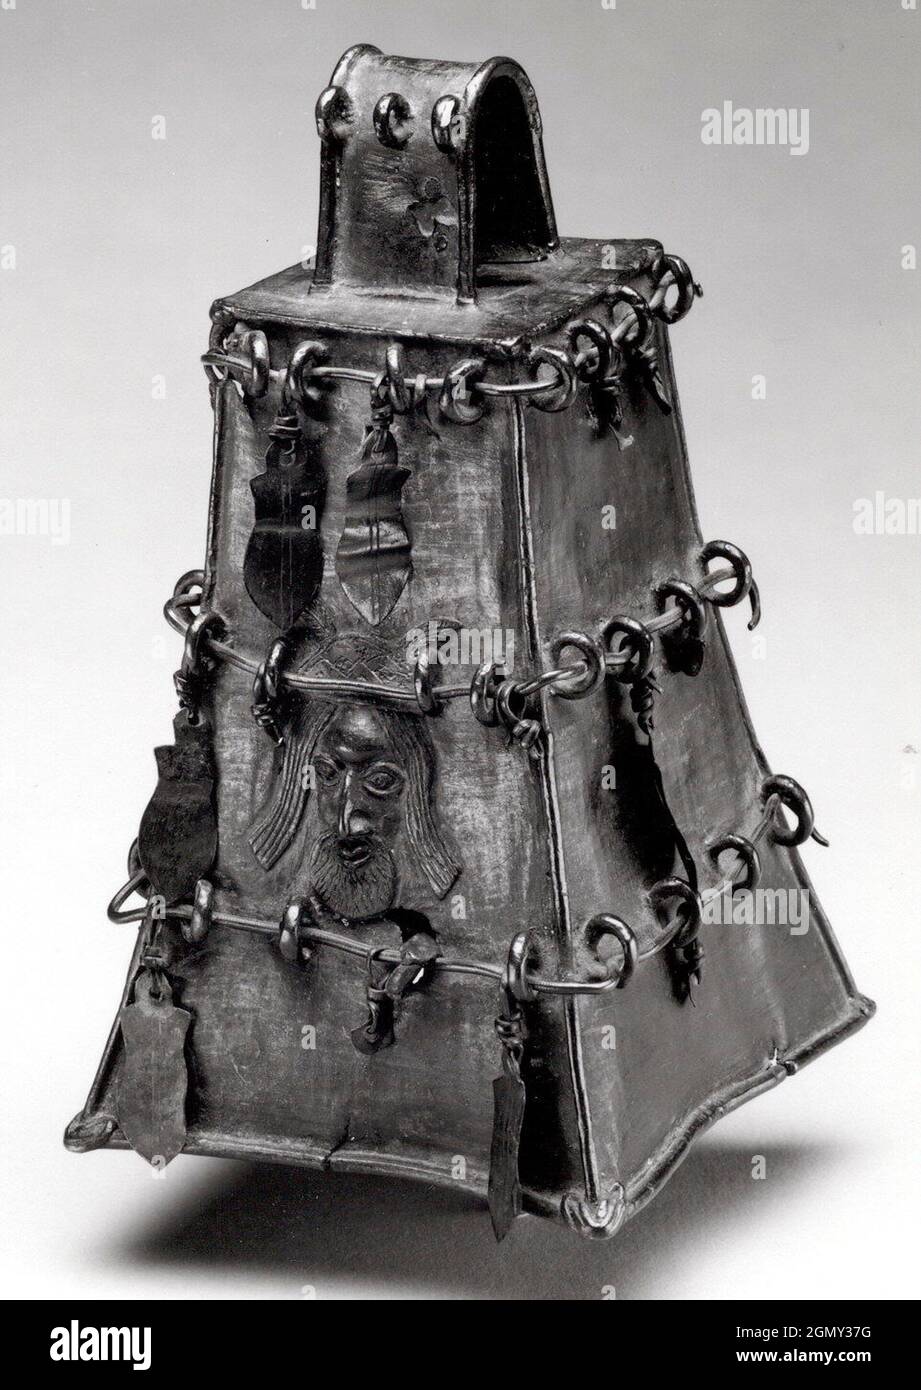 Altar Bell: Portuguese Face. Date: 16th-17th century; Geography: Nigeria, Court of Benin; Culture: Edo peoples; Medium: Brass; Dimensions: H. 4 1/4 x Stock Photo